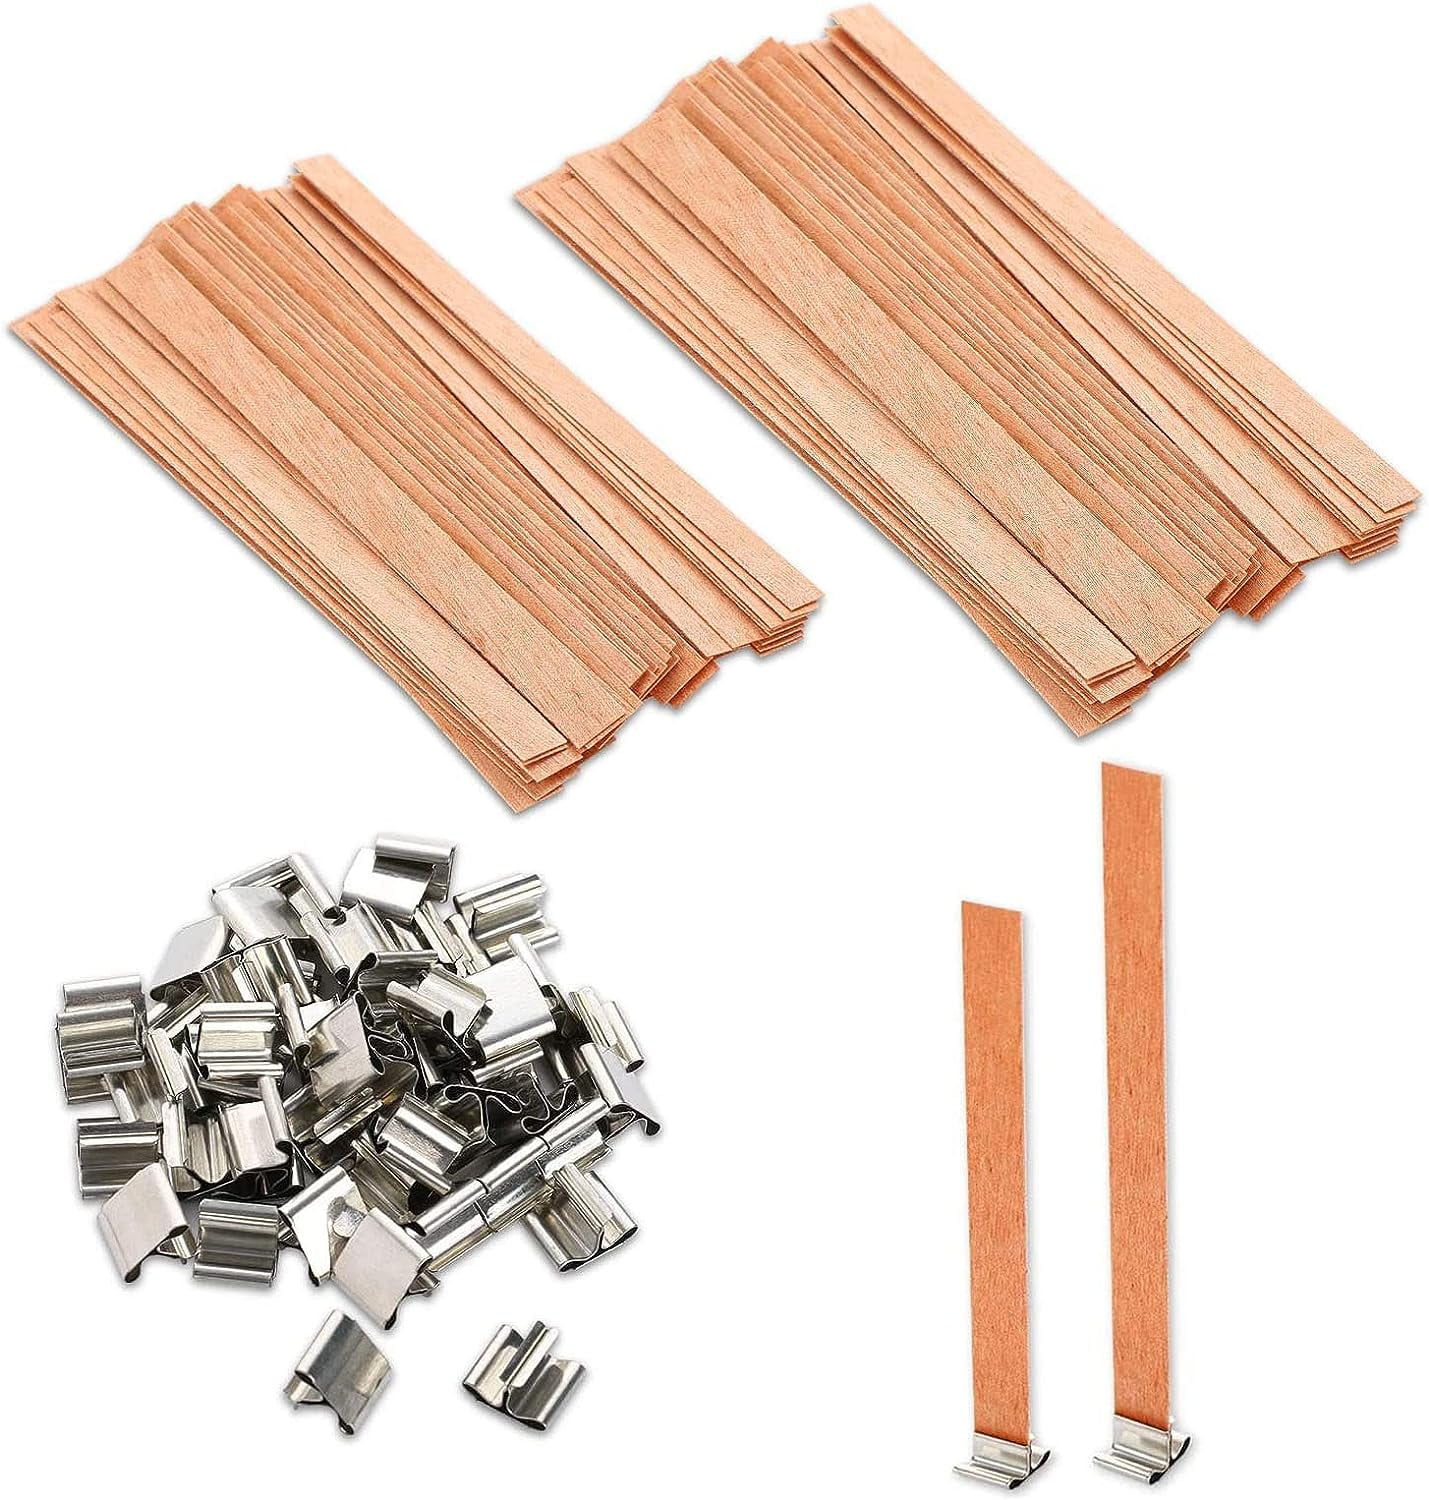 20pcs-(10 Wood Chips + 10 Clips)Wood Candle Wicks-Wooden Wick Long Lasting  Flame-Easily Burn,Natural Candle Cores